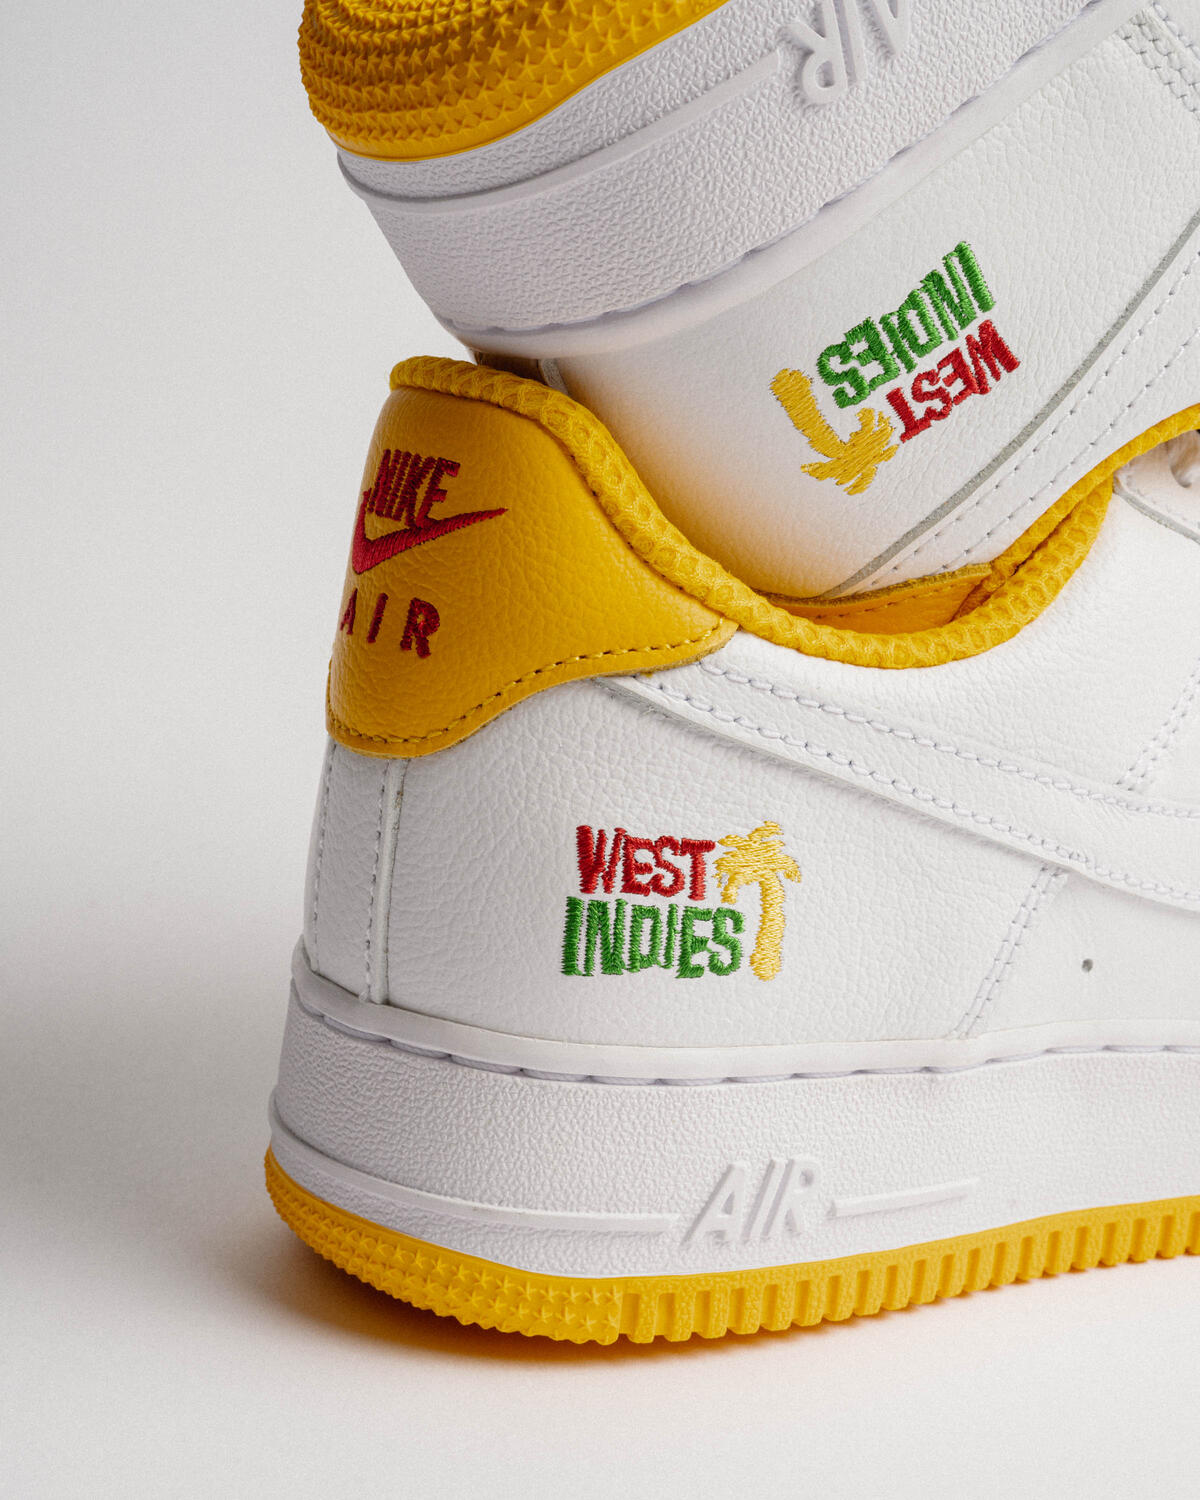 Nike AIR FORCE 1 LOW RETRO QS 'West Indies'